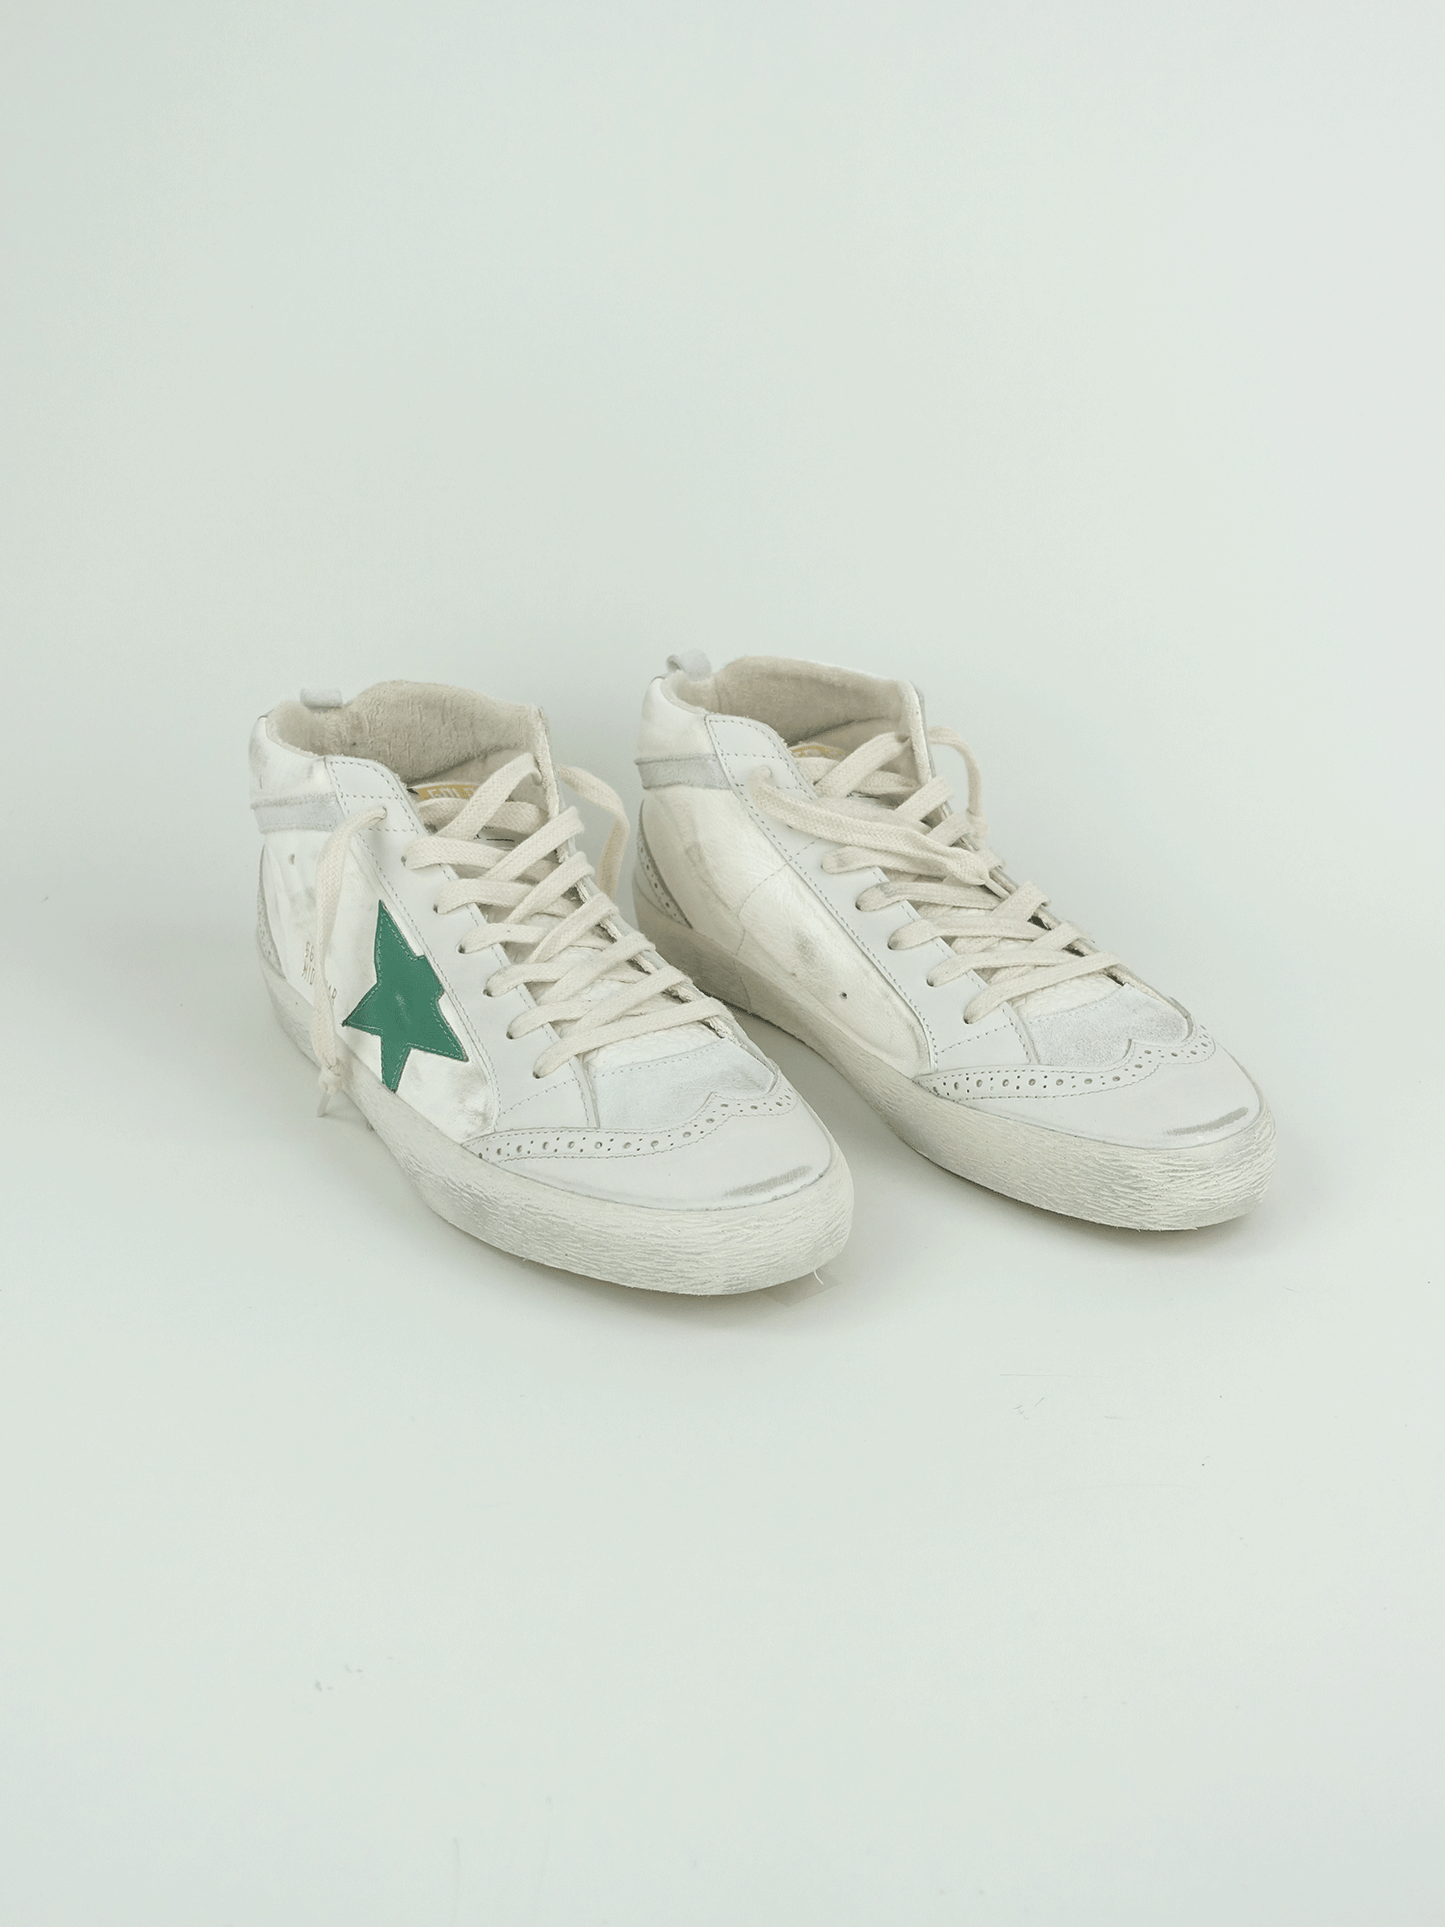 MID STAR NAPPA UPPER LEATHER TOE STAR AND SPUR HIGH FREQUENCY TONGUE SUEDE WAVE GMF00122.F004133.15426 CREAM/MILKY/GREEN/WHITE/SILVER